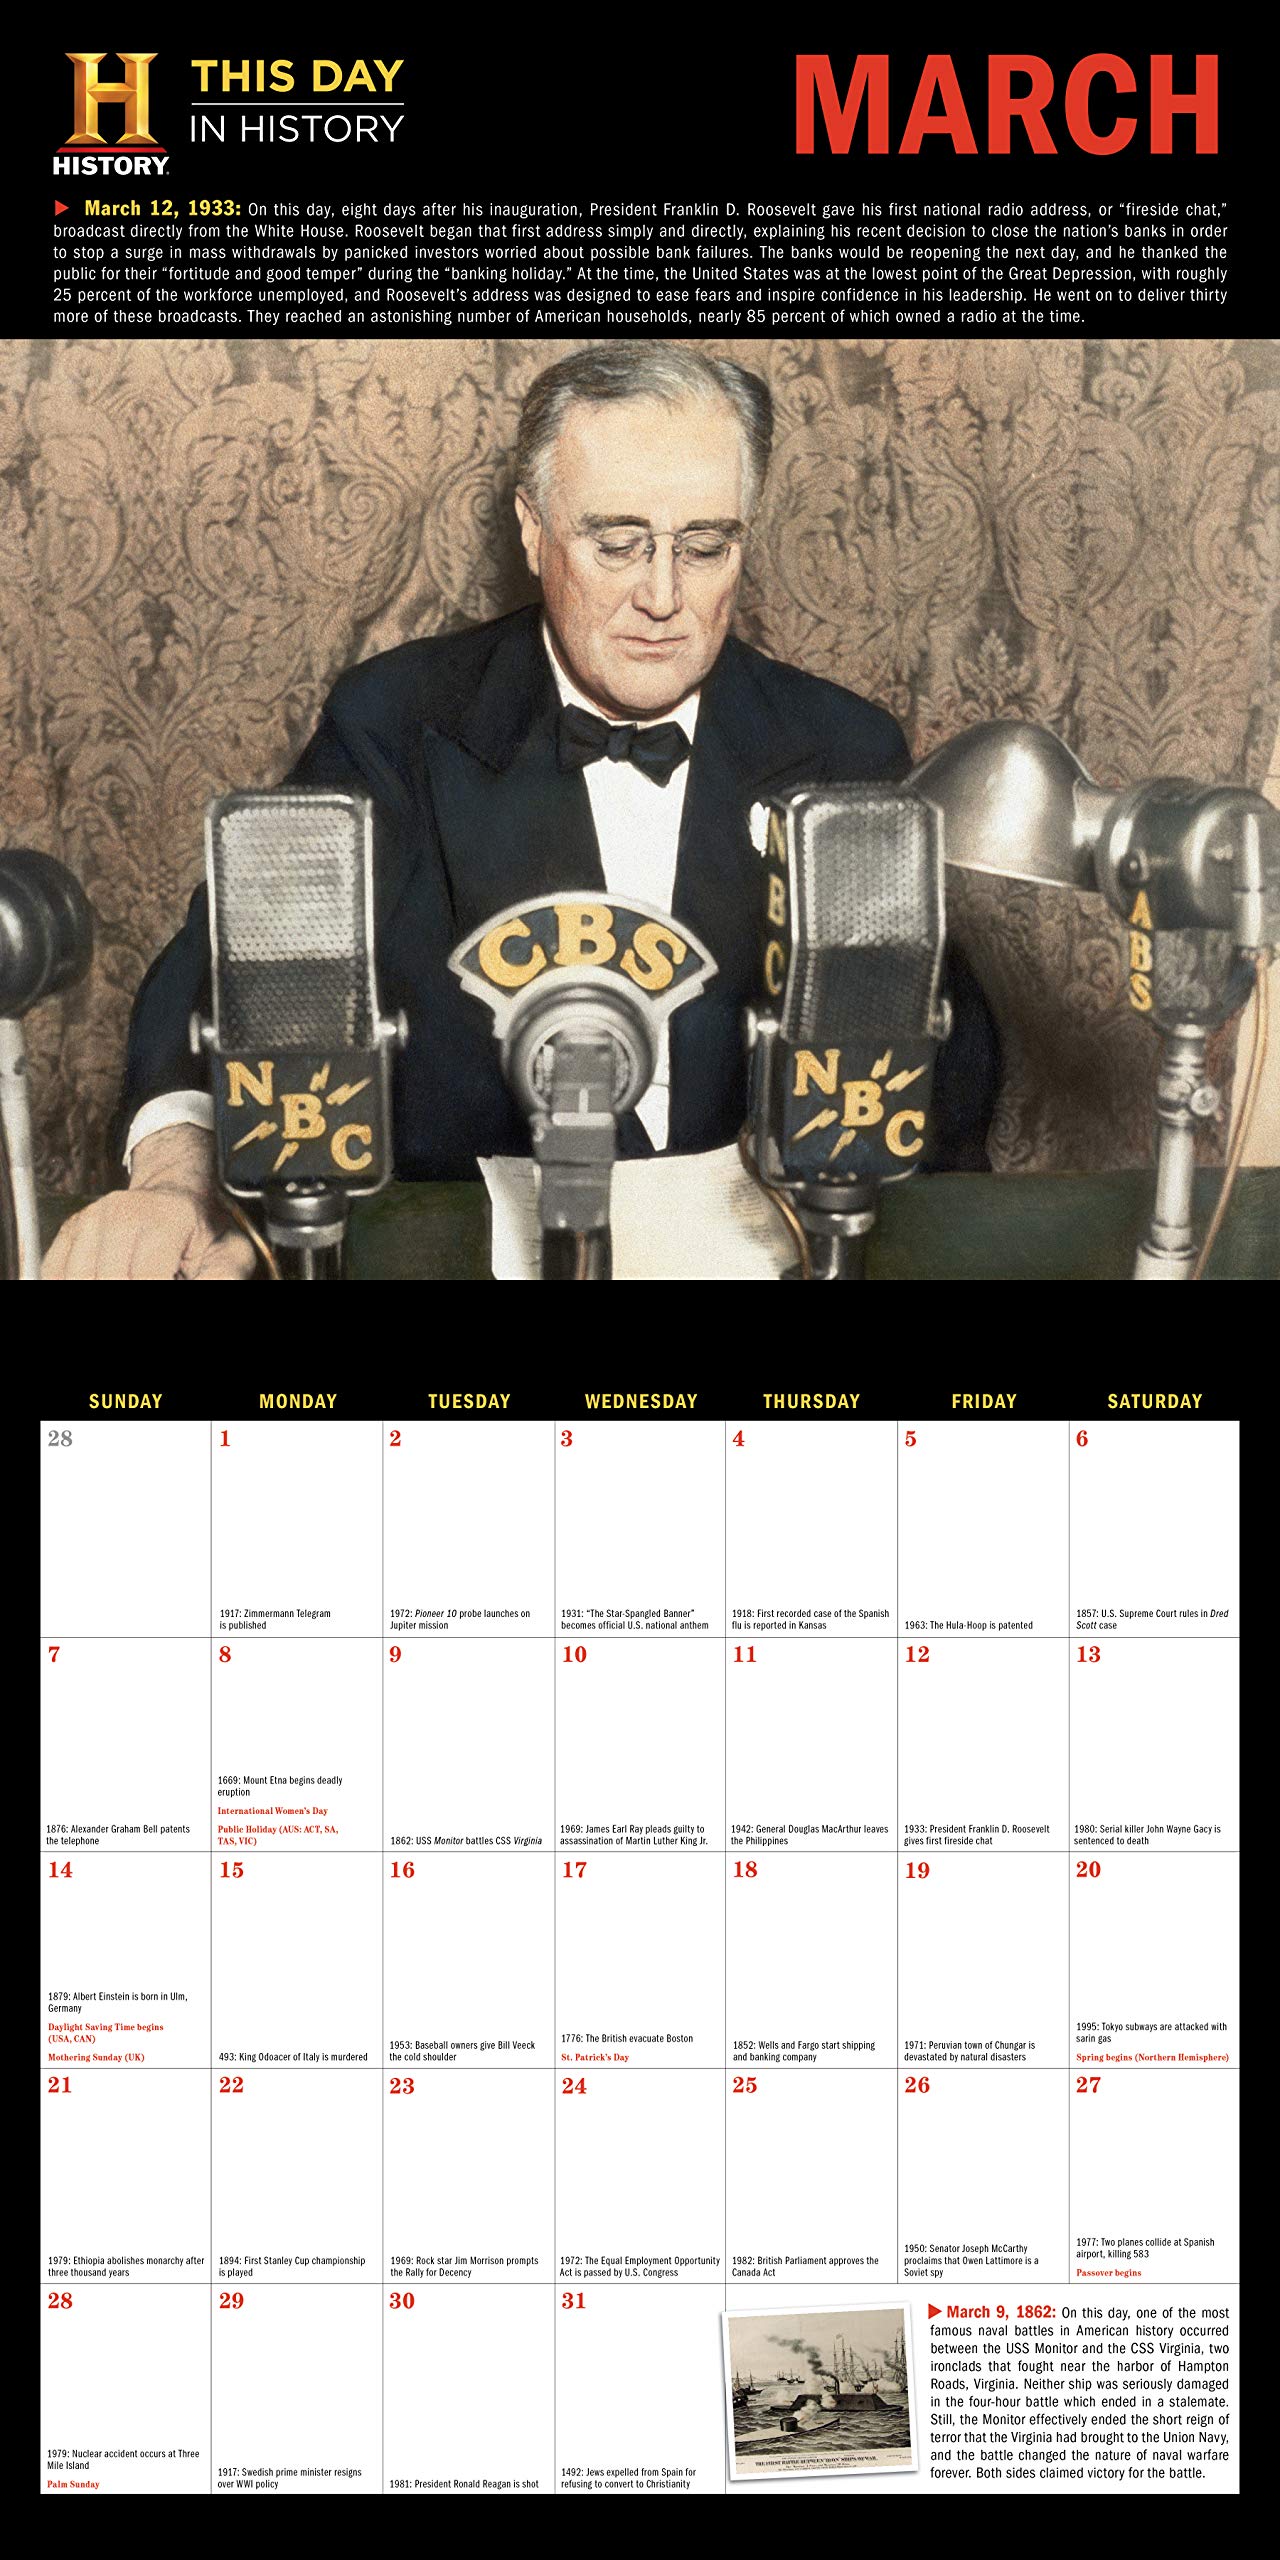 History Channel This Day in History Wall Calendar 365 Remarkable